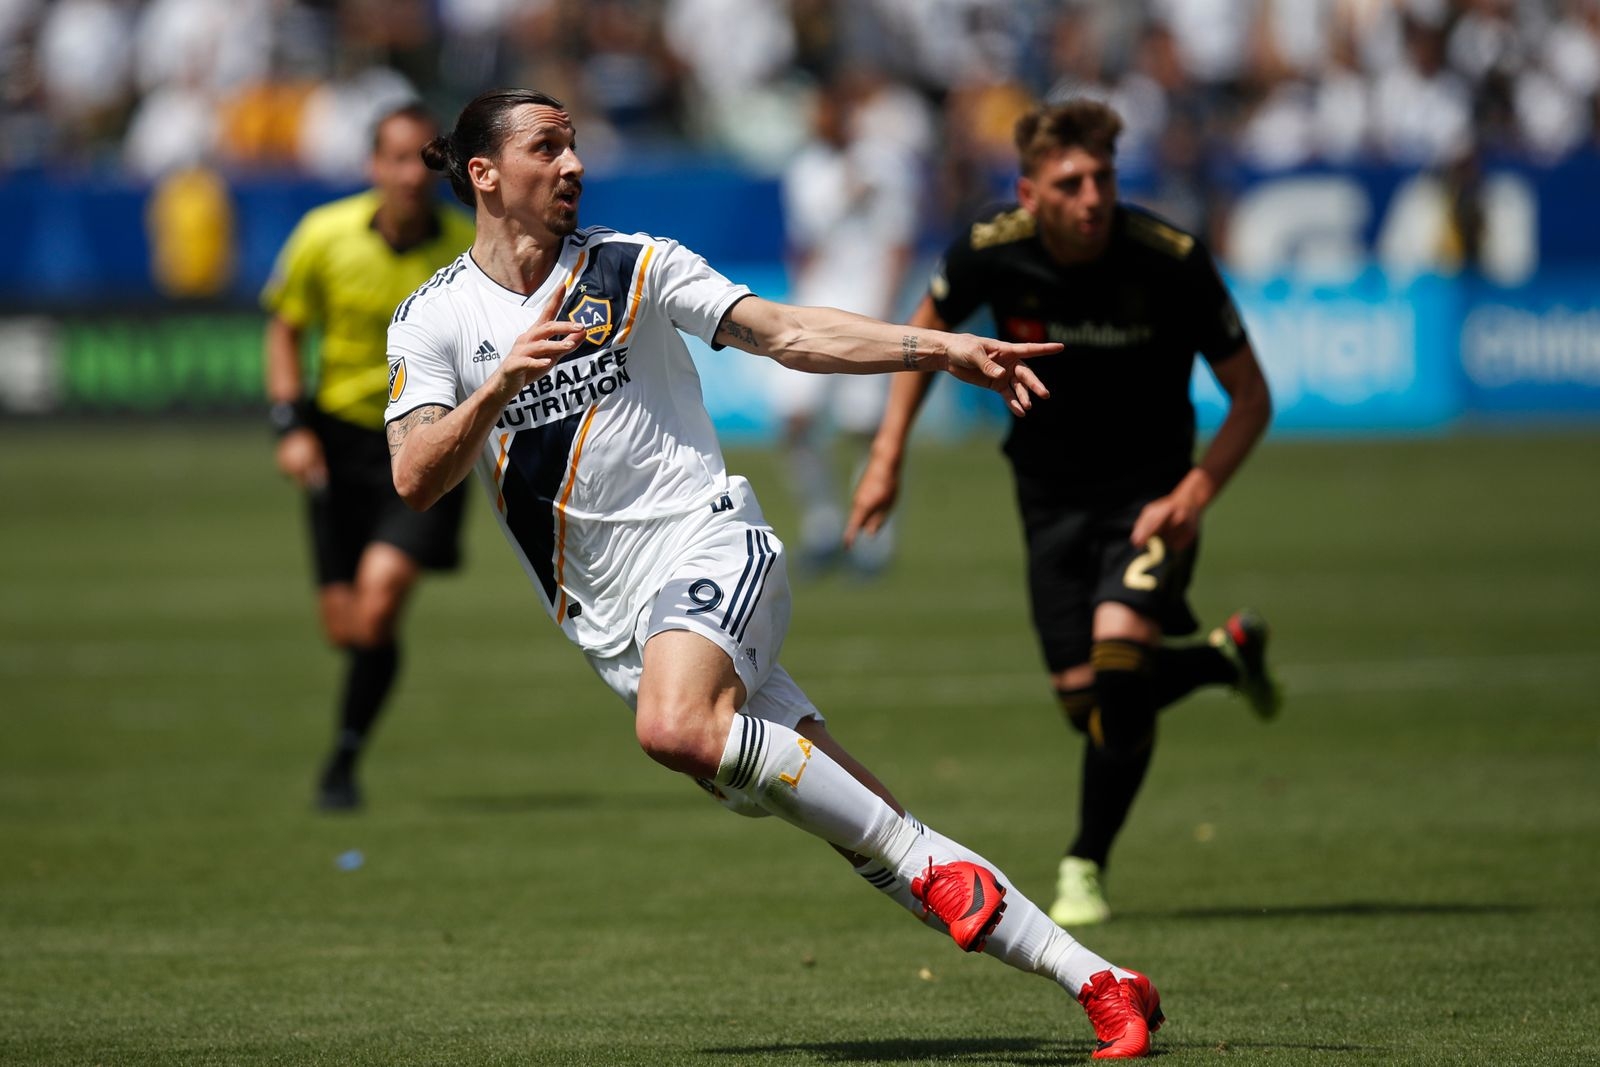 Los Angeles Galaxy's Zlatan Ibrahimovic, of Sweden, follows the play during the second half of an MLS soccer match against the Los Angeles FC Saturday, March 31, 2018, in Carson, Calif. The Galaxy won 4-3. (AP Photo/Jae C. Hong)